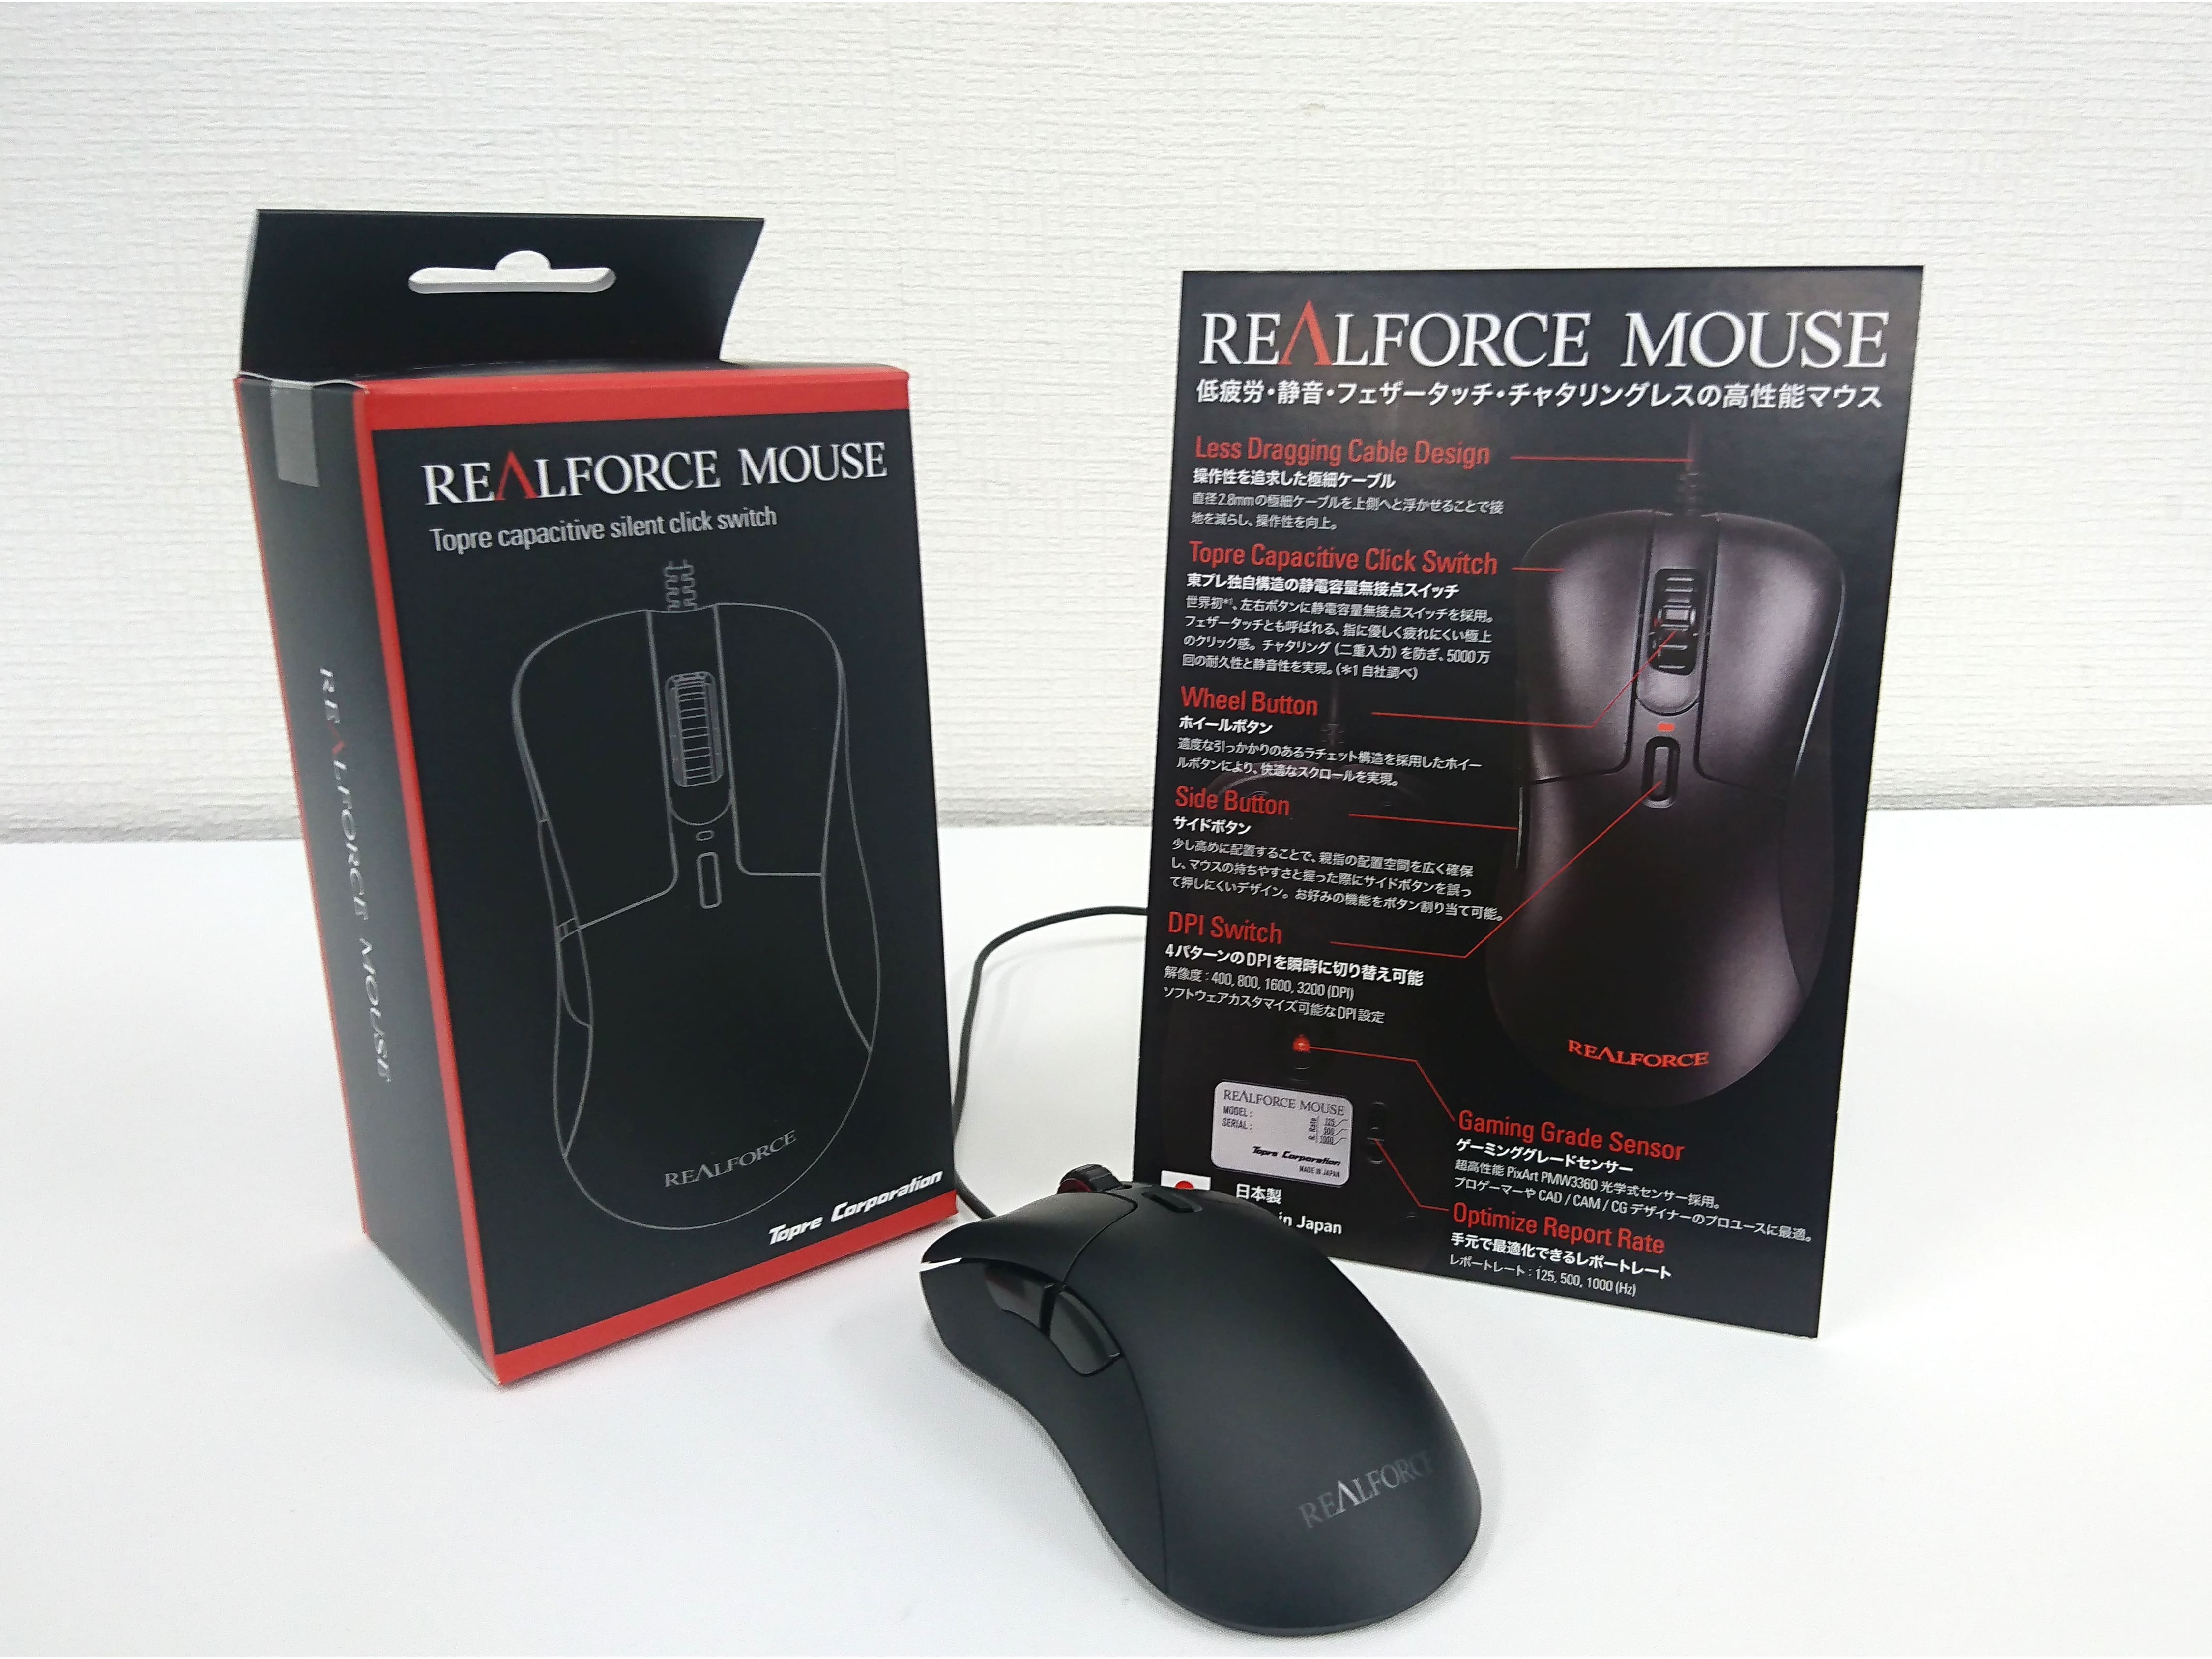 PC/タブレット PC周辺機器 東プレから「REALFORCE MOUSE」遂に登場 | Ark Tech and Market News 